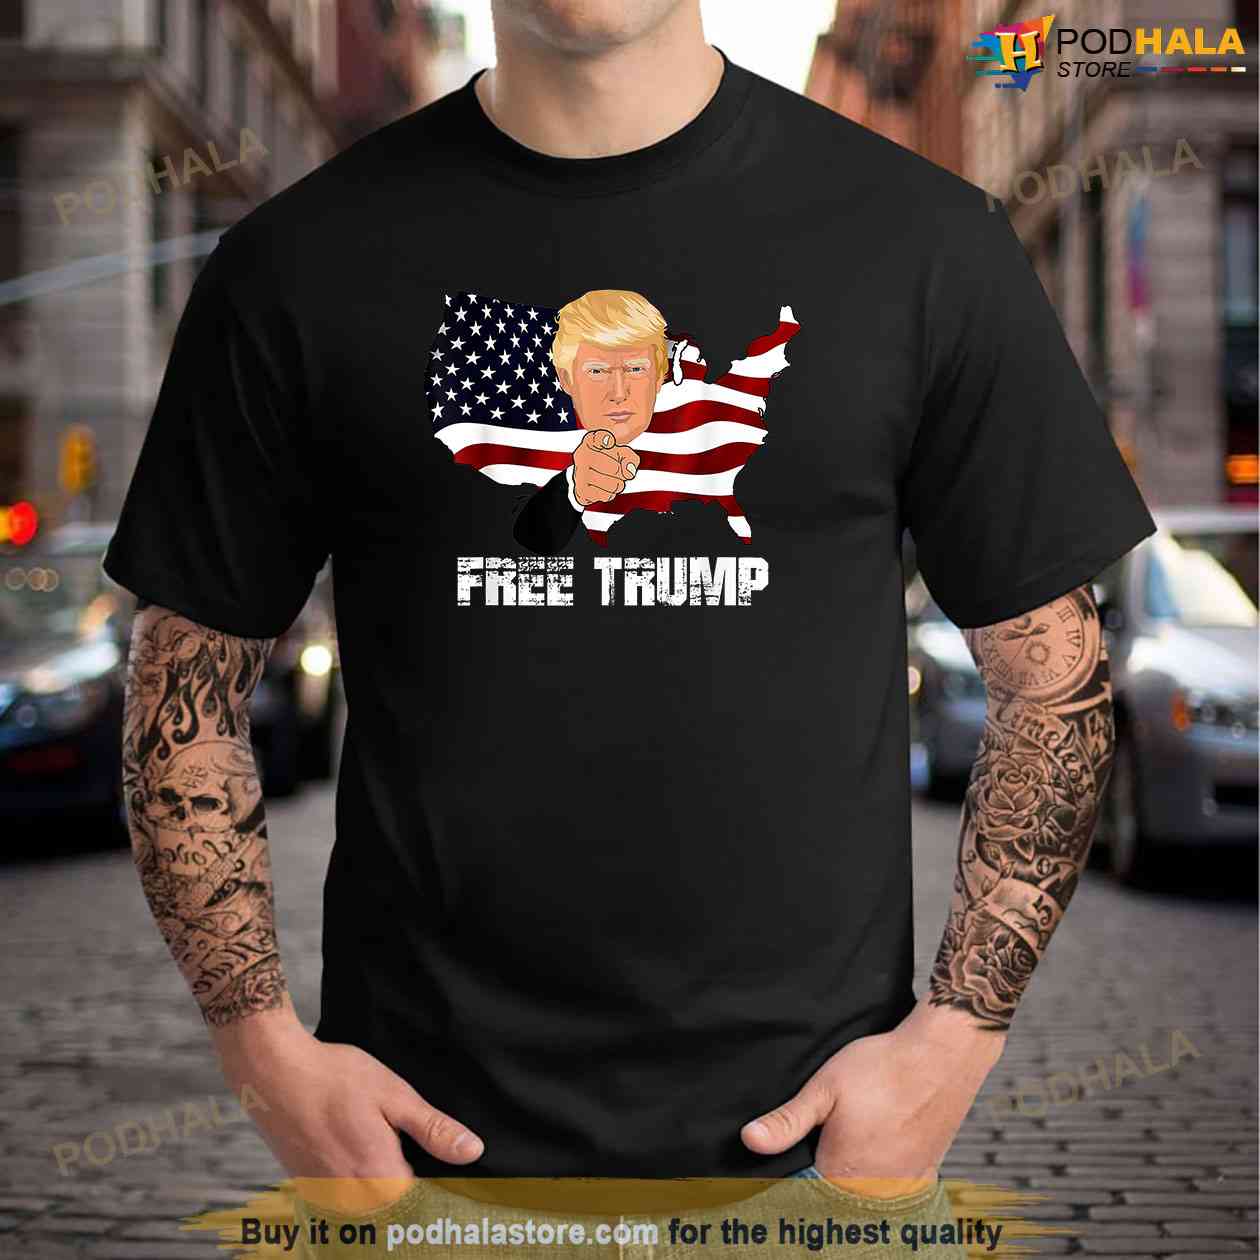 kravle Kænguru Globus Free Donald Trump T-Shirt, American Flag Free Trump Shirt - Bring Your  Ideas, Thoughts And Imaginations Into Reality Today